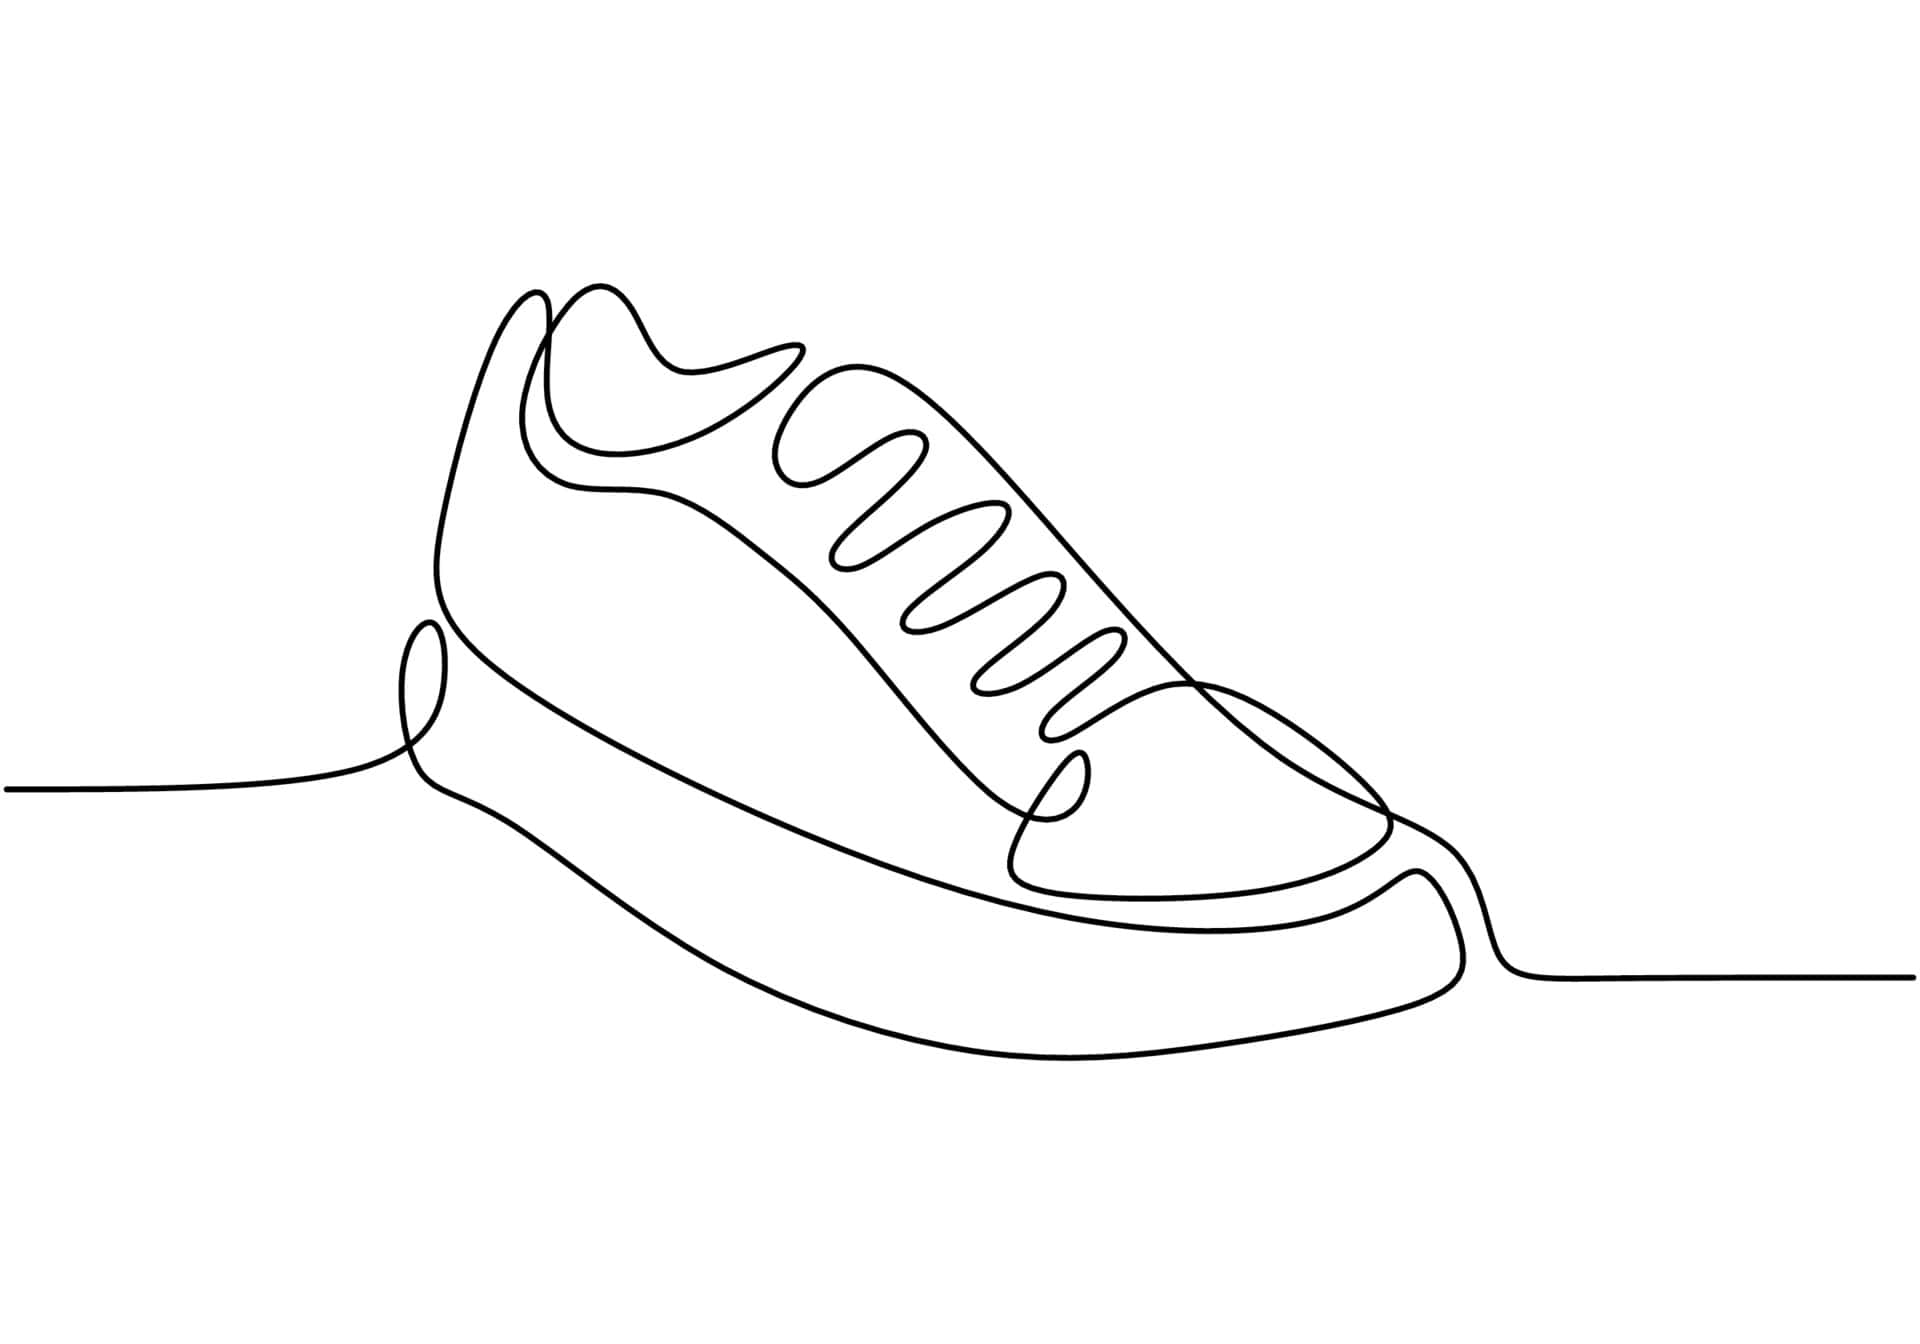 A Continuous Line Drawing Of A Shoe